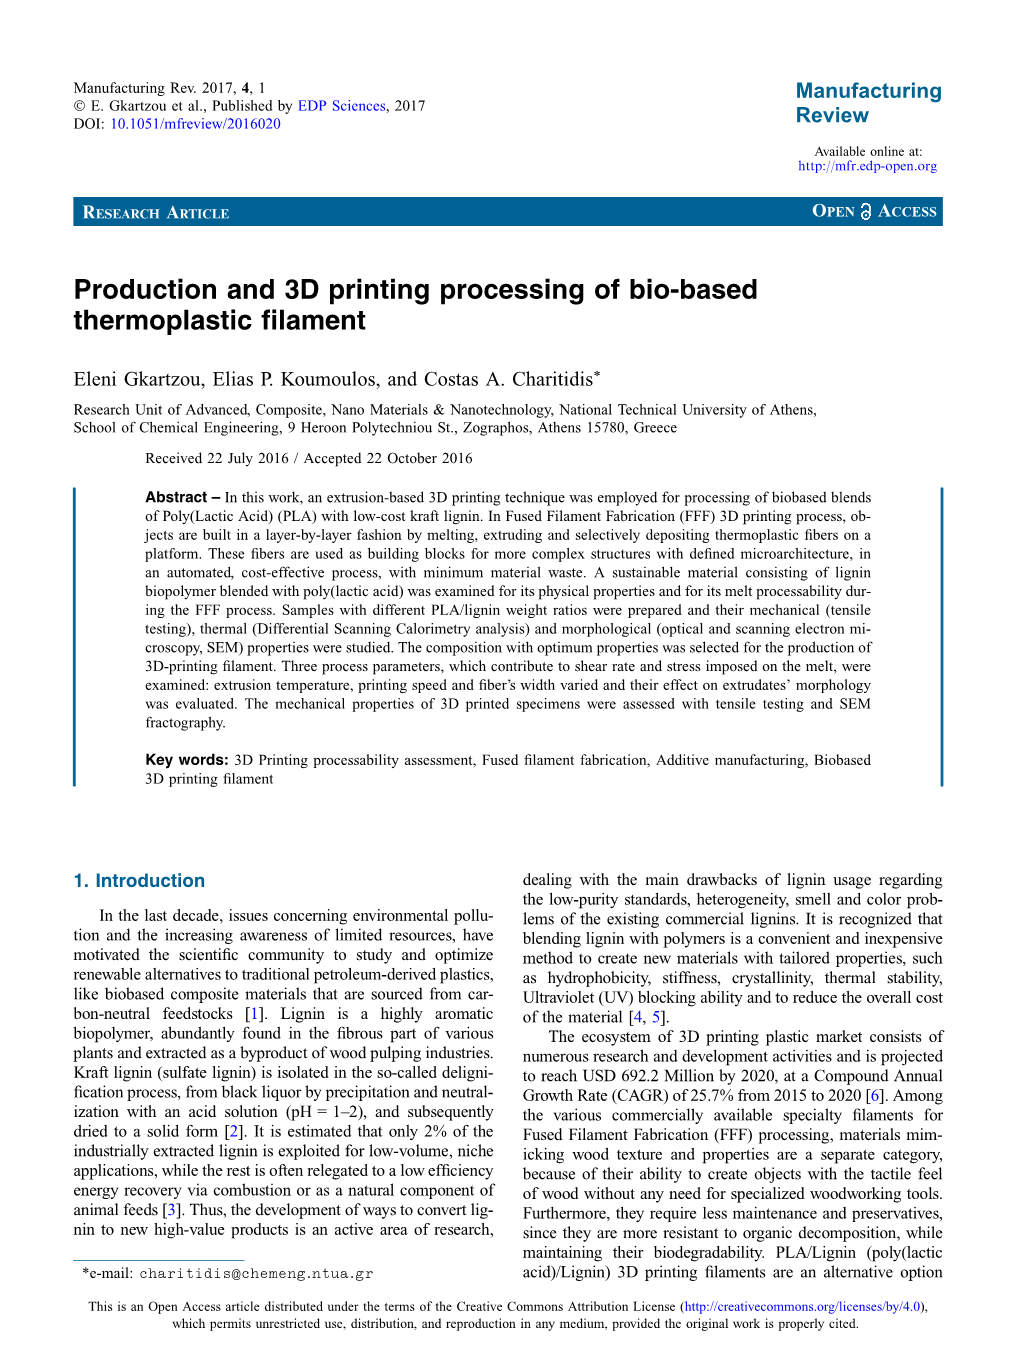 Production and 3D Printing Processing of Bio-Based Thermoplastic Filament